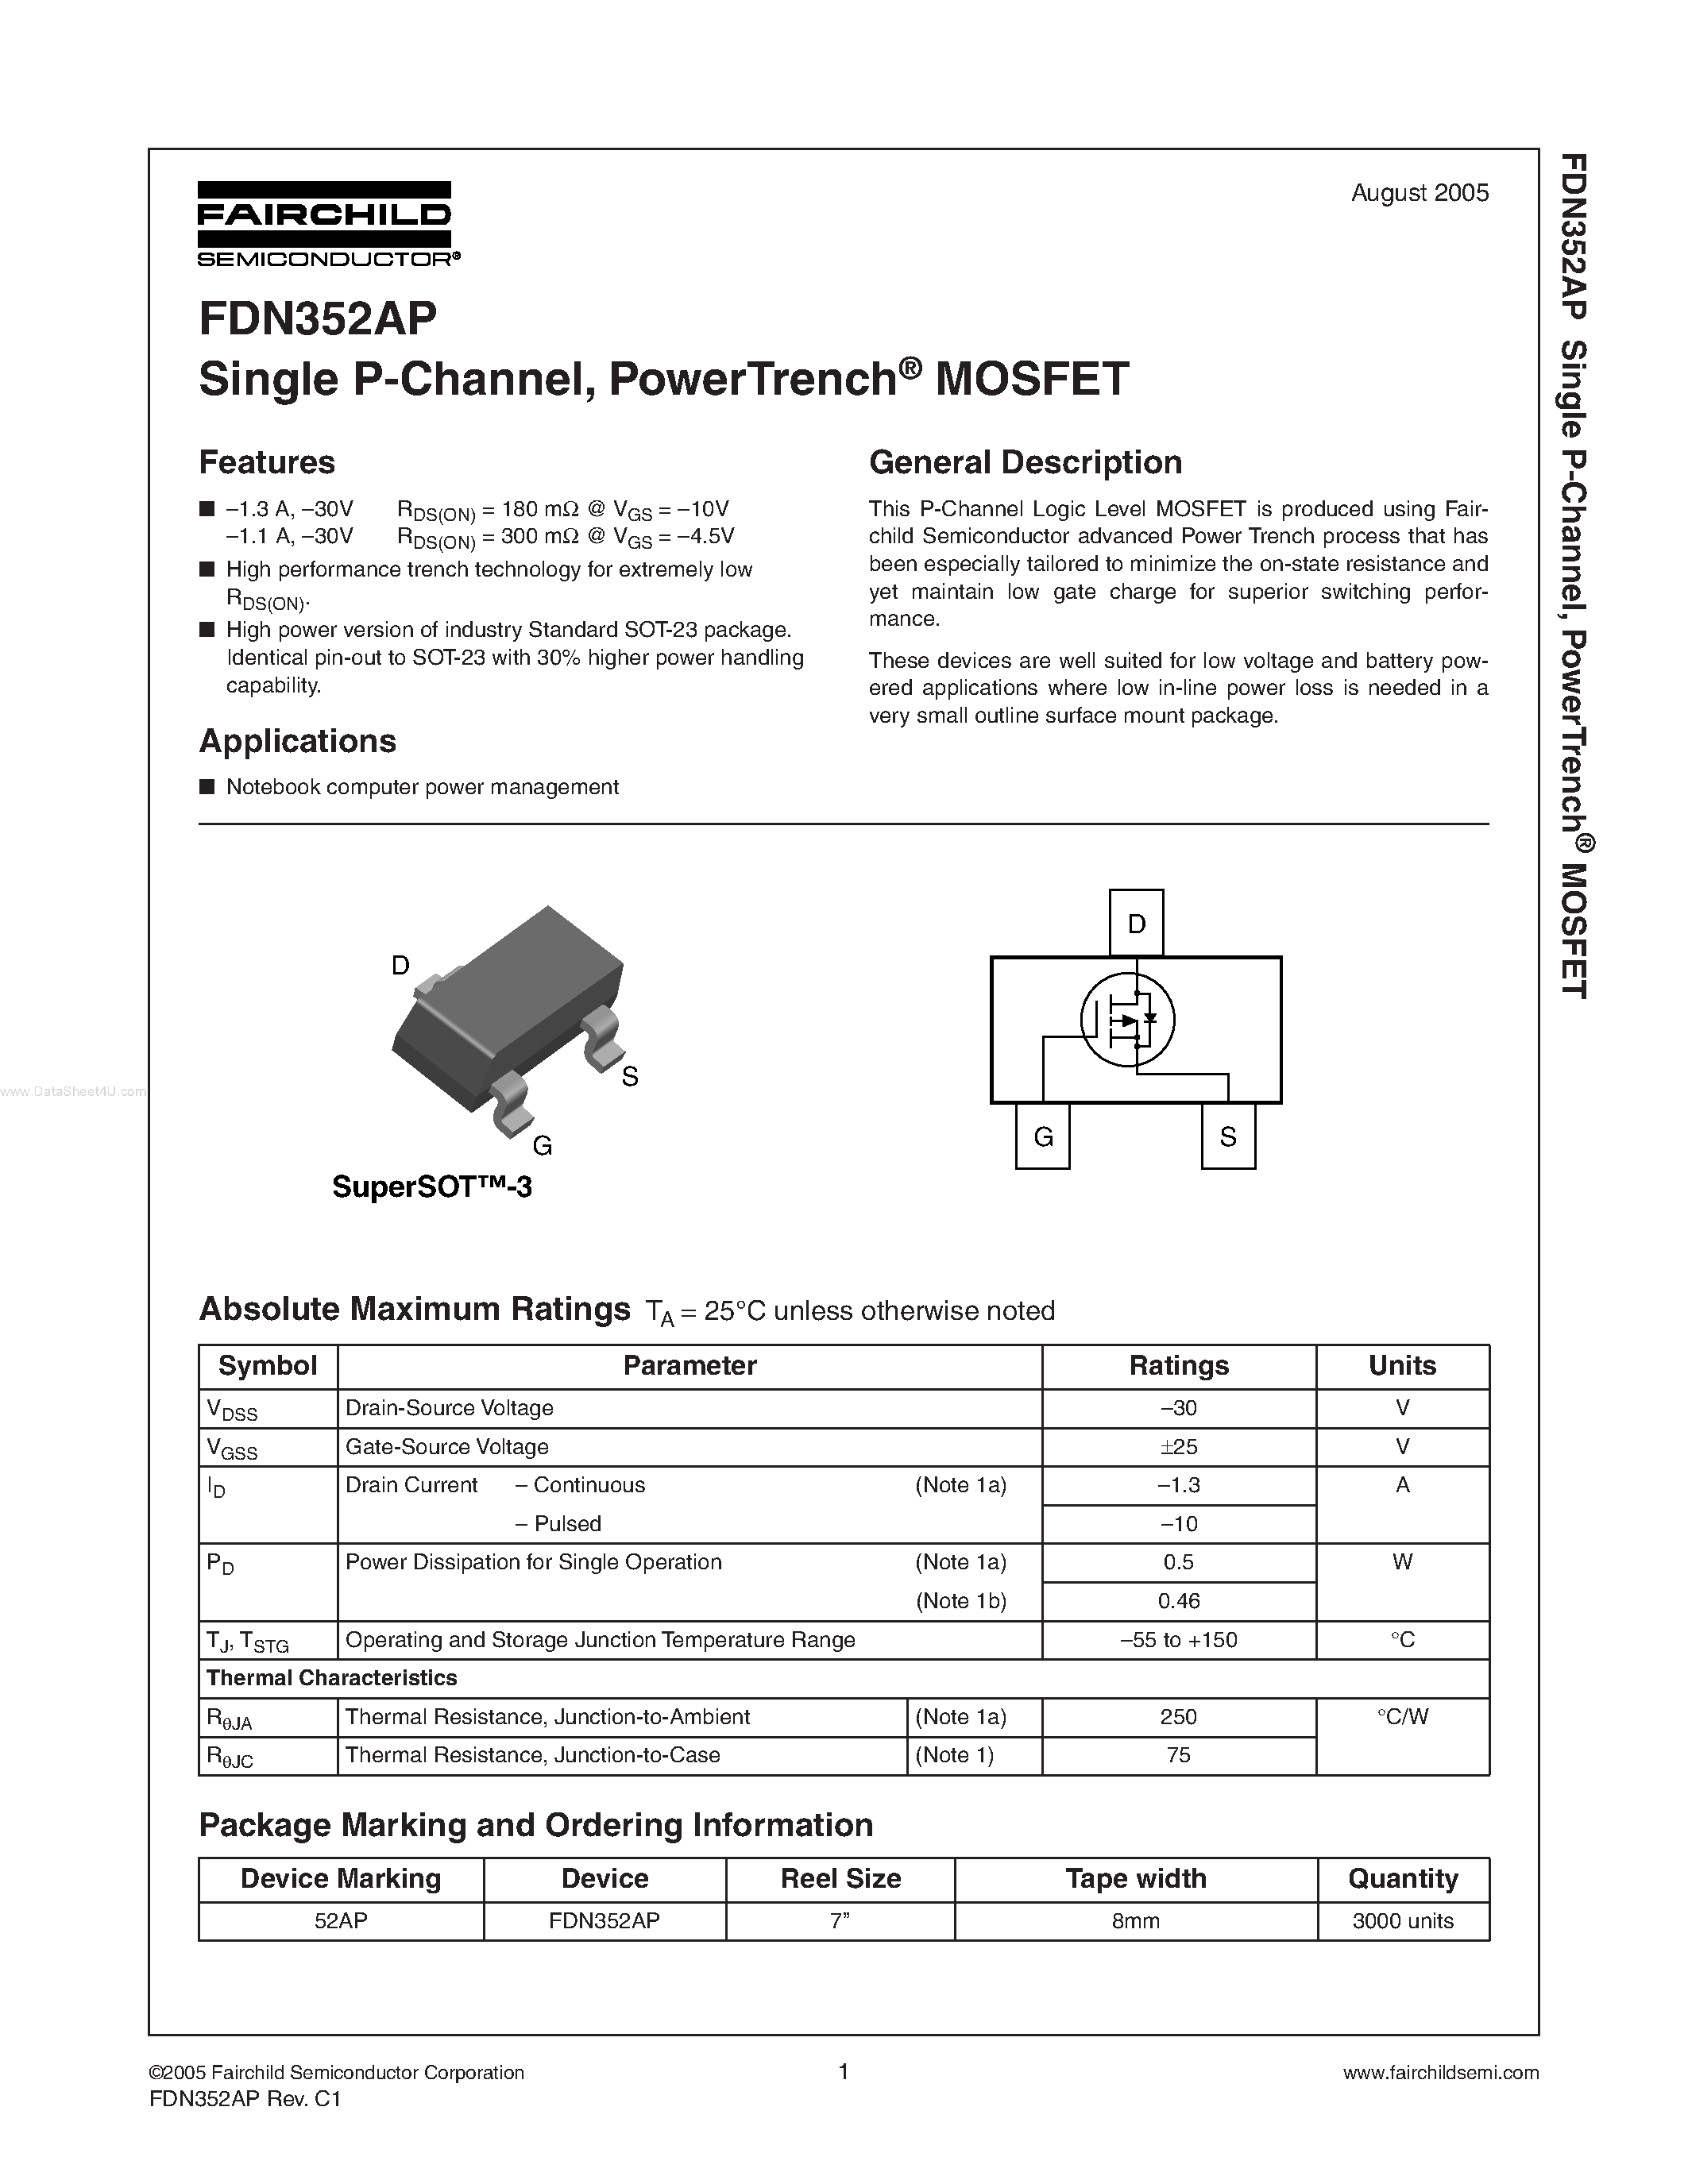 Даташит FDN352AP-PowerTrench MOSFET страница 1